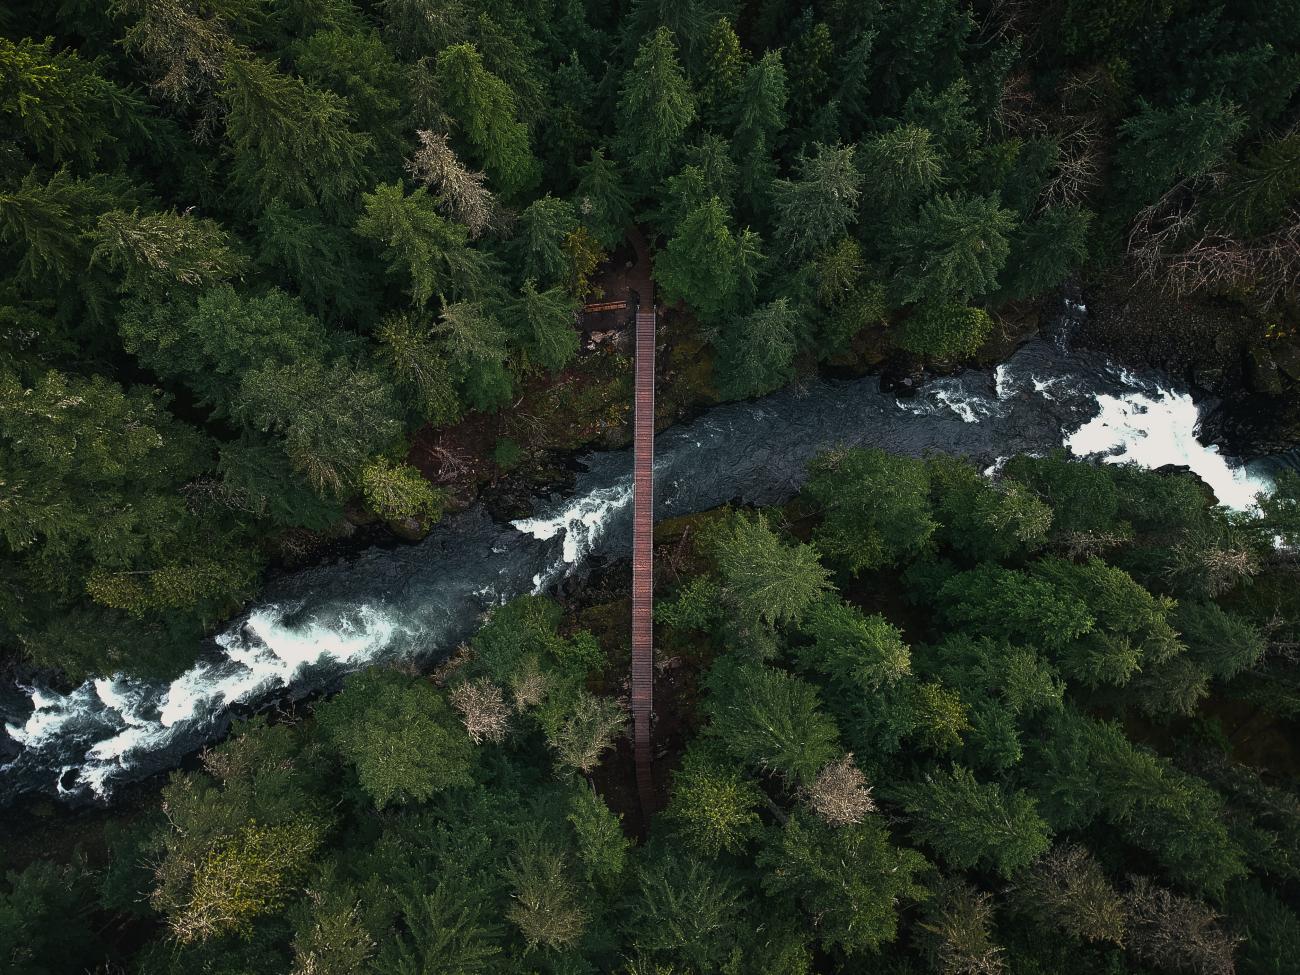 Acting as natural reservoirs, forests in watersheds release and purify water by slowing erosion and delaying its release into streams. Photo by Tristan McKenzie on Unsplash